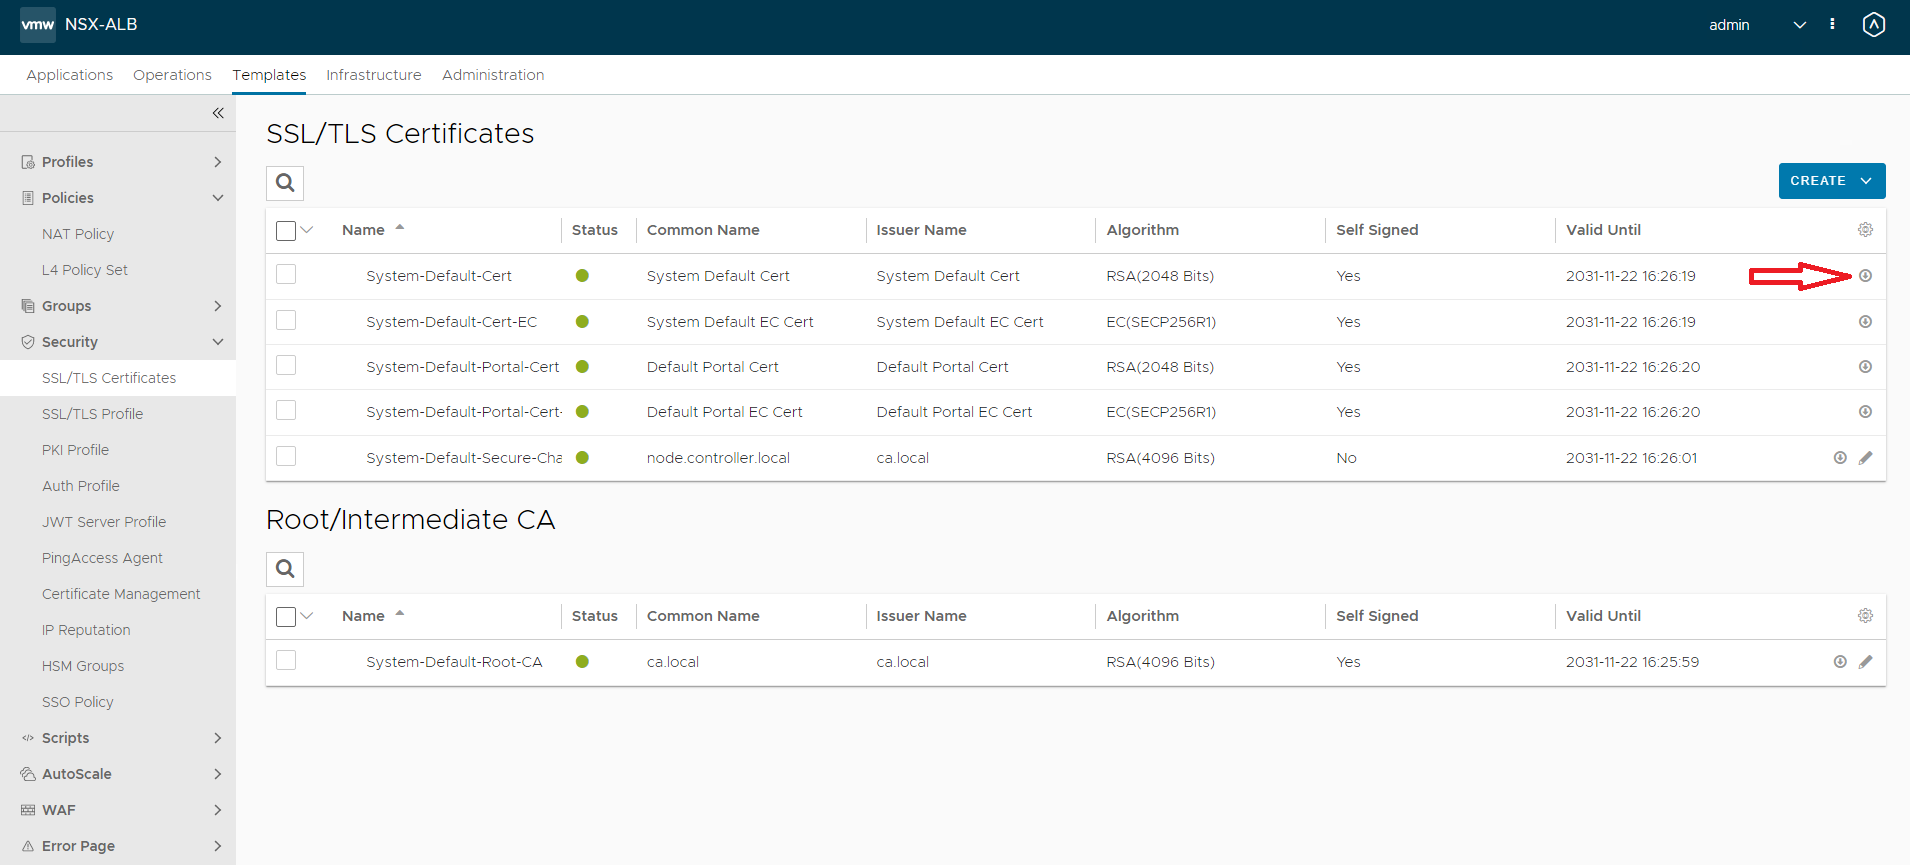 Deploying TCE with NSX Advanced Load Balancer (AVI) on VMware Cloud on AWS